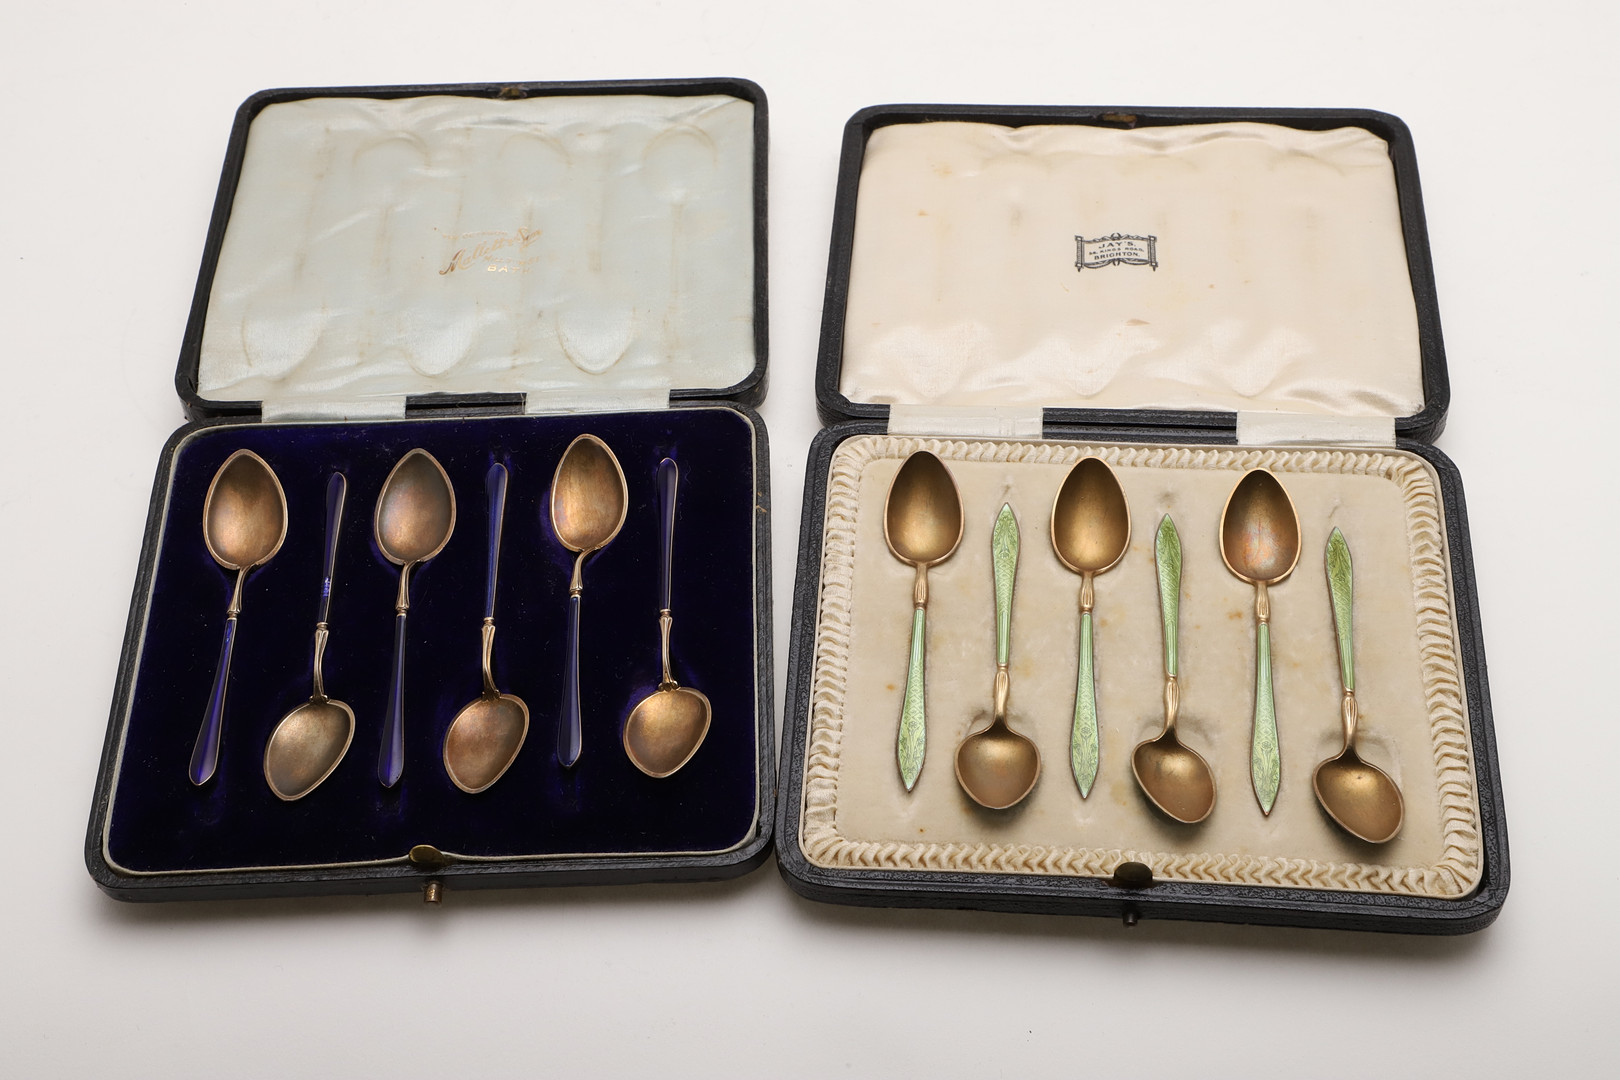 TWO CASED SETS OF LATE 19TH/ EARLY 20TH CENTURY NORWEGIAN SILVERGILT & ENAMEL COFFEE SPOONS. - Image 3 of 3